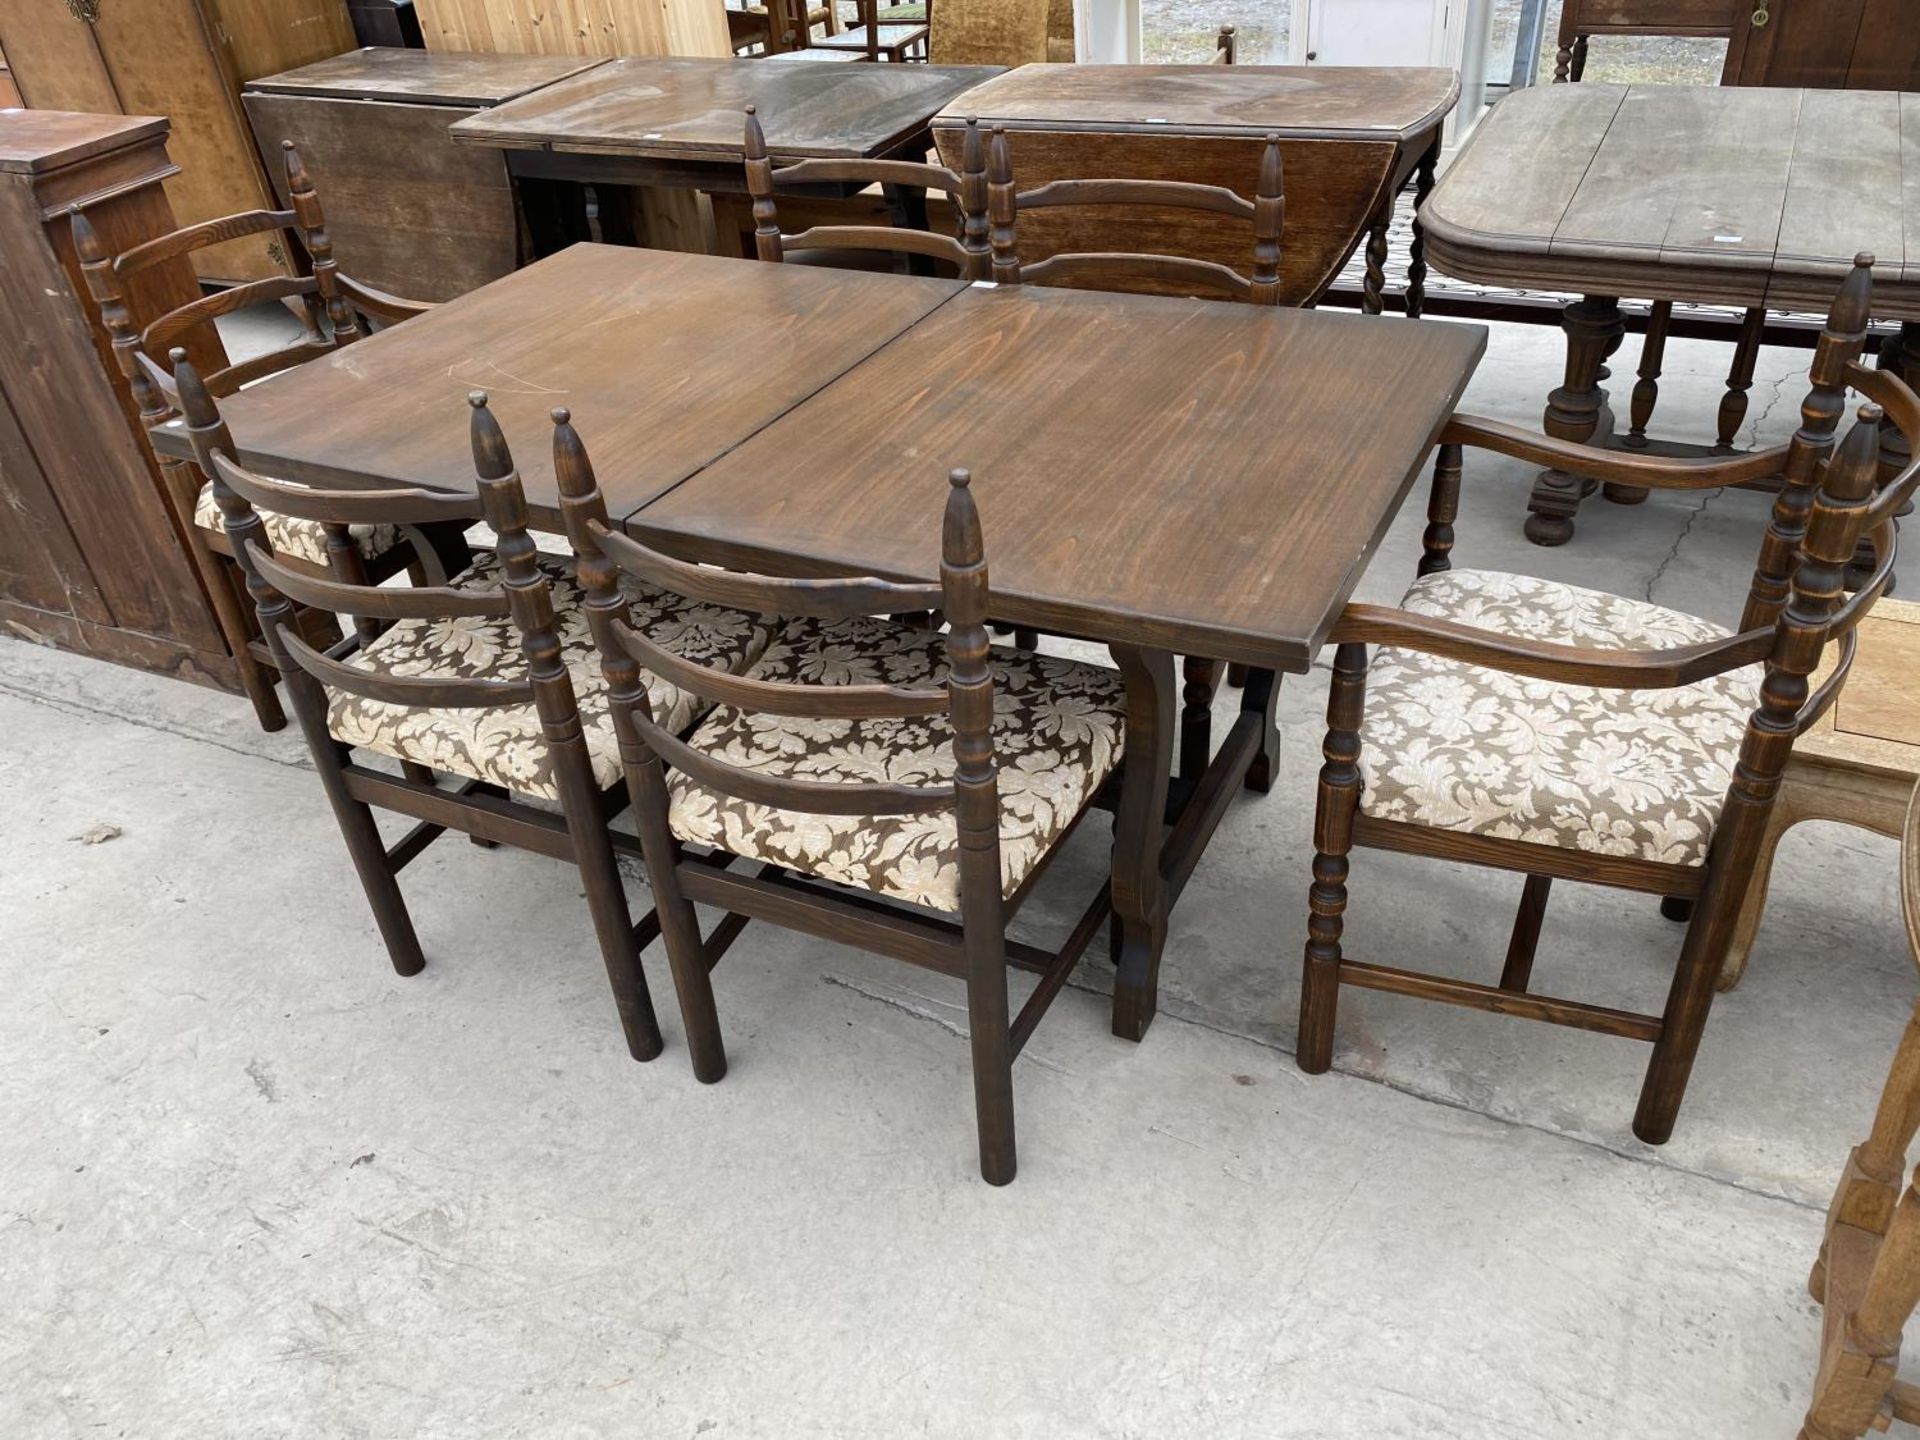 A YOUNGER TOLEDO OAK EXTENDING DINING TABLE WITH FOUR DINING CHAIRS AND TWO CARVERS